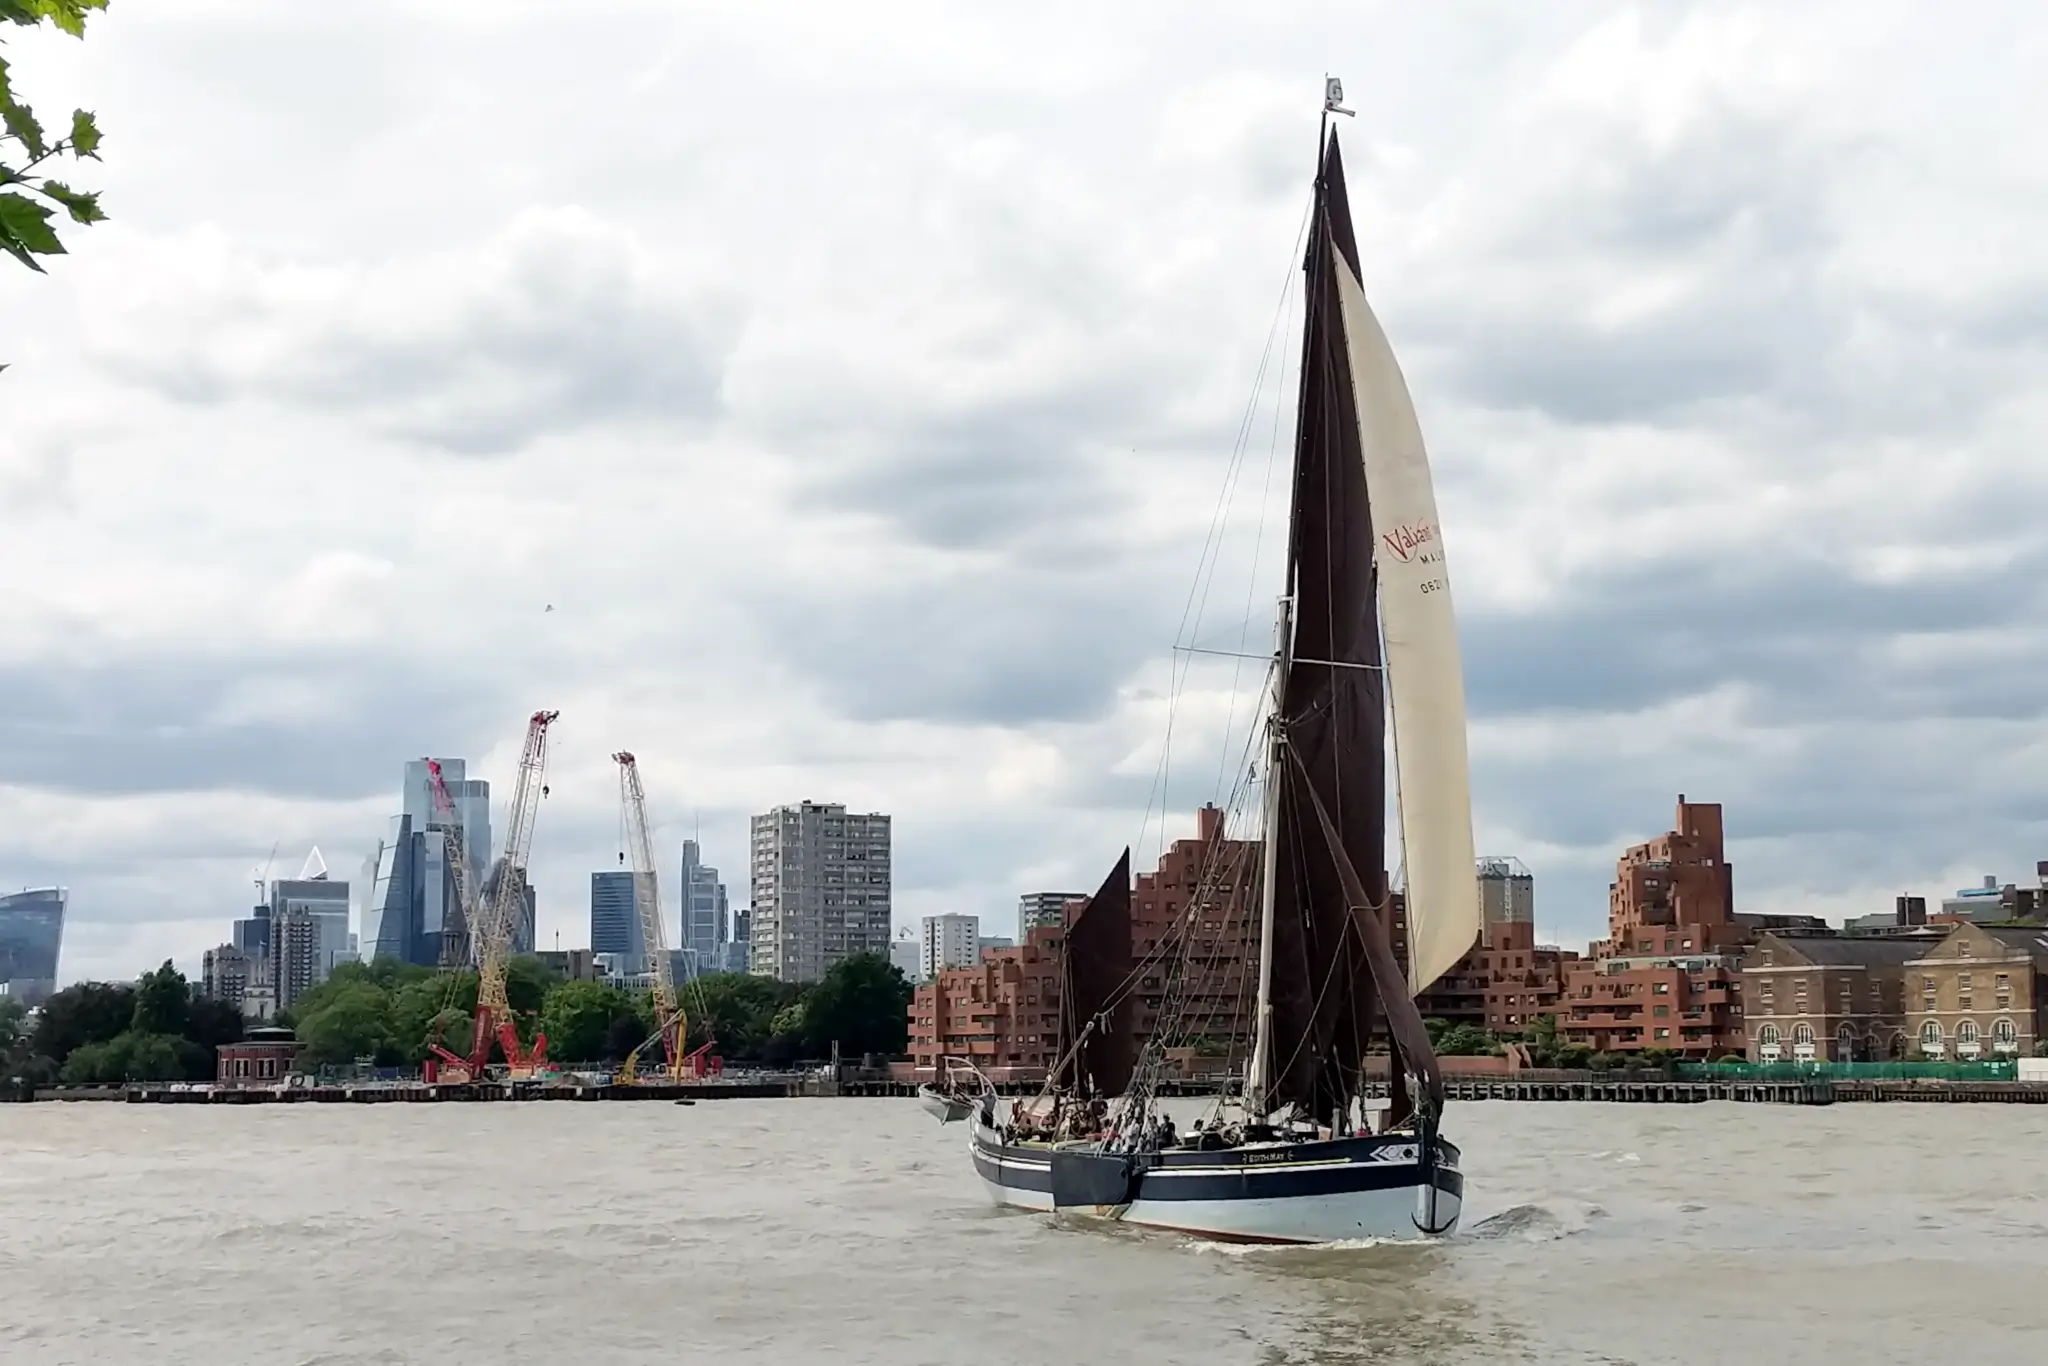 A barge sailing on the Thames. In the background the towers of the City of
London are visible, as are the cranes of the super sewer site at Wapping. The
tide is high